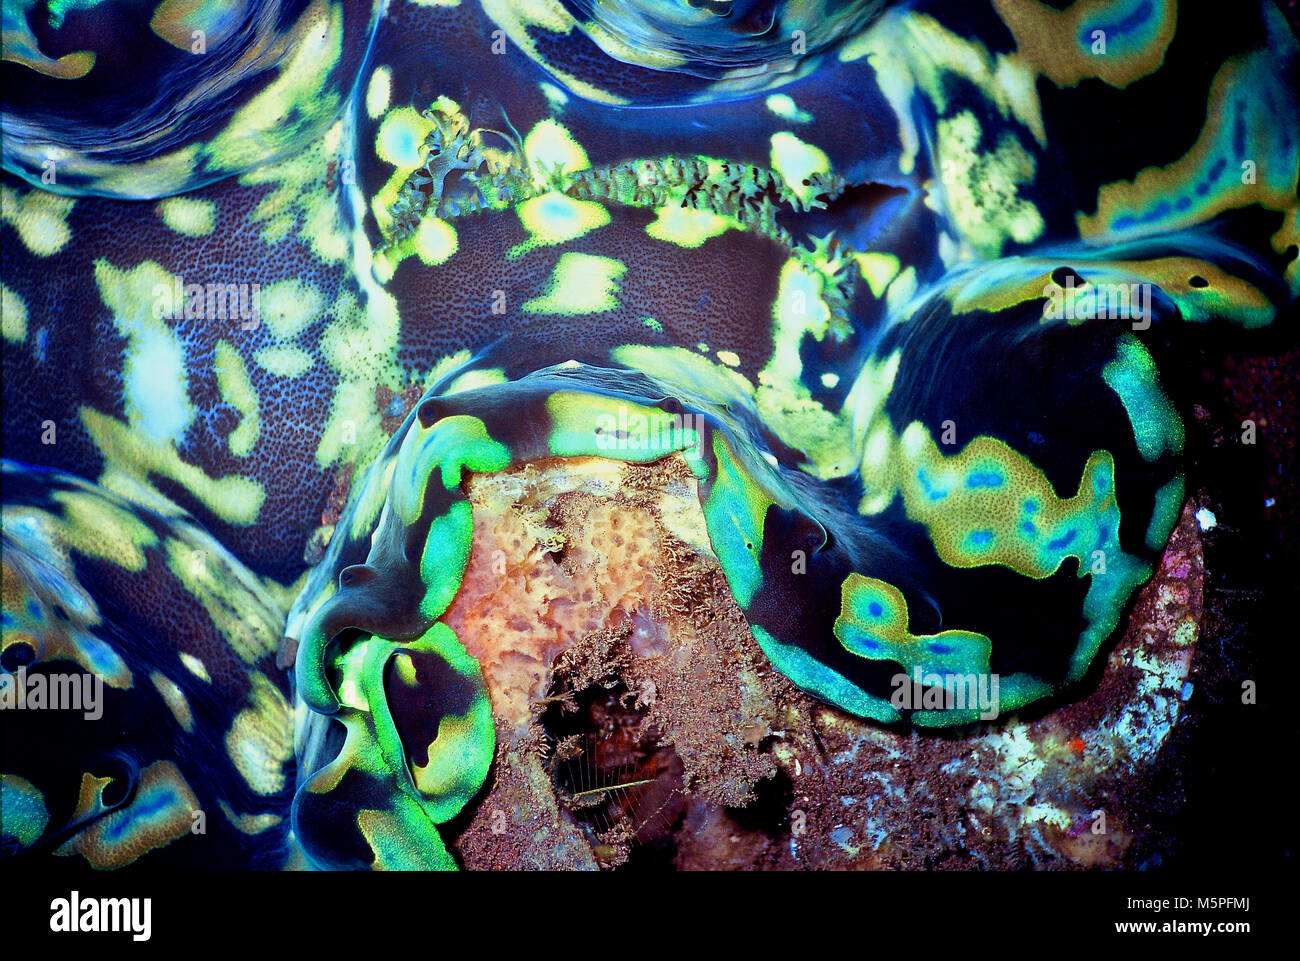 This shows the tissues of a giant clam (Tridacna gigas). The species can grow to one metre in length, weigh 200 kilograms and live for 100 years. The image shows the patterns formed by multi-coloured colonies of single-celled dinoflagellate symbiotic algae in the mollusc's mantle. In exchange for a safe place to live, the algae provide the clam with sugars through photosynthesis. Sadly, giant clams are becoming rarer, due to the effects of global warming and pollution - and because their meat is highly prized by humans. The IUCN Red List indicates that it is vulnerable. Bali, Indonesia. Stock Photo